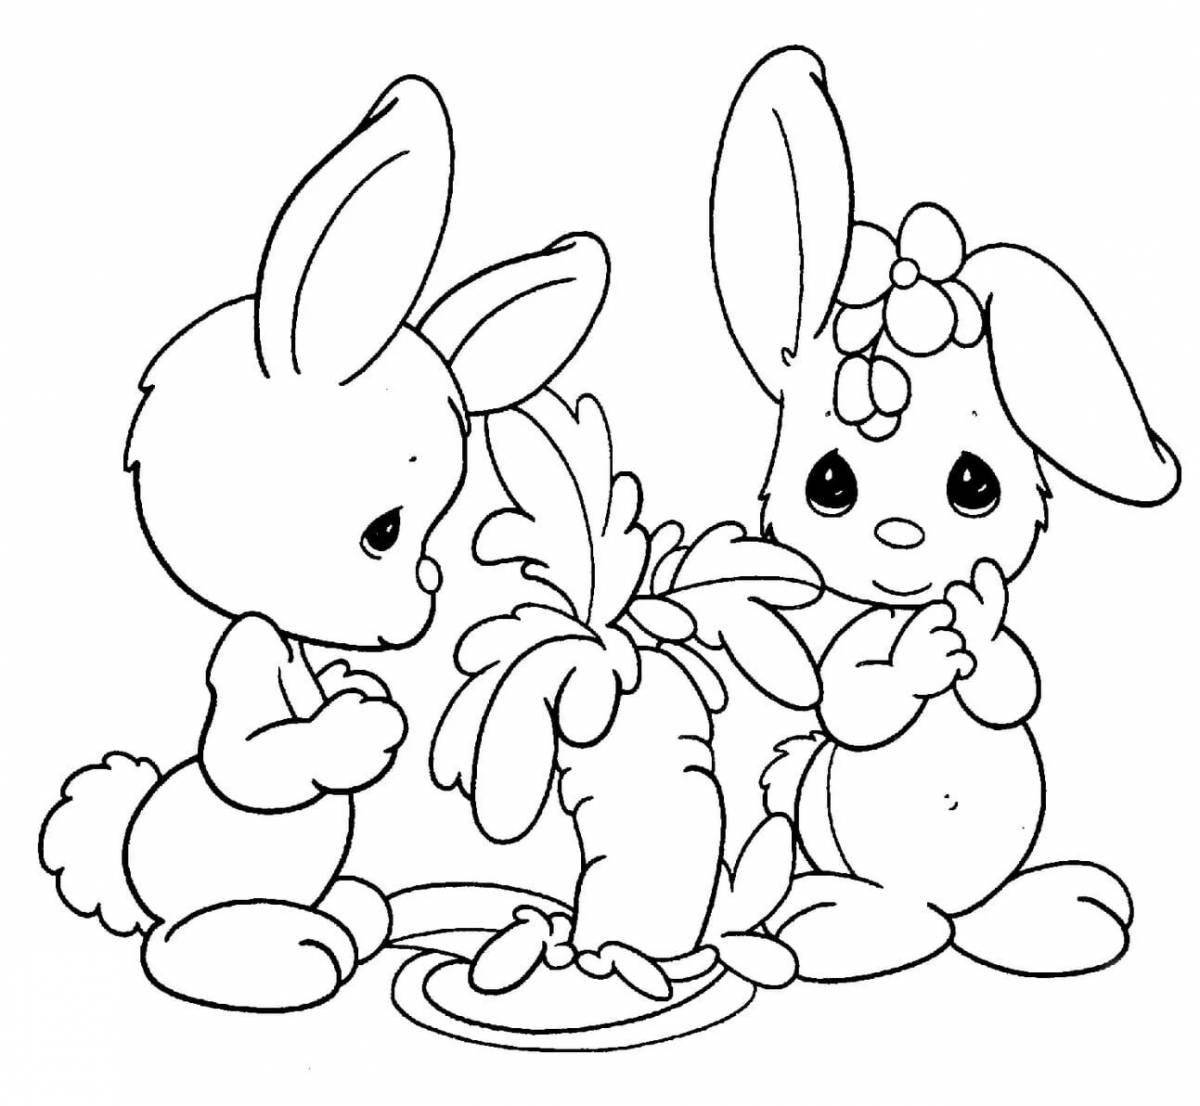 Coloring book fluffy cute rabbit